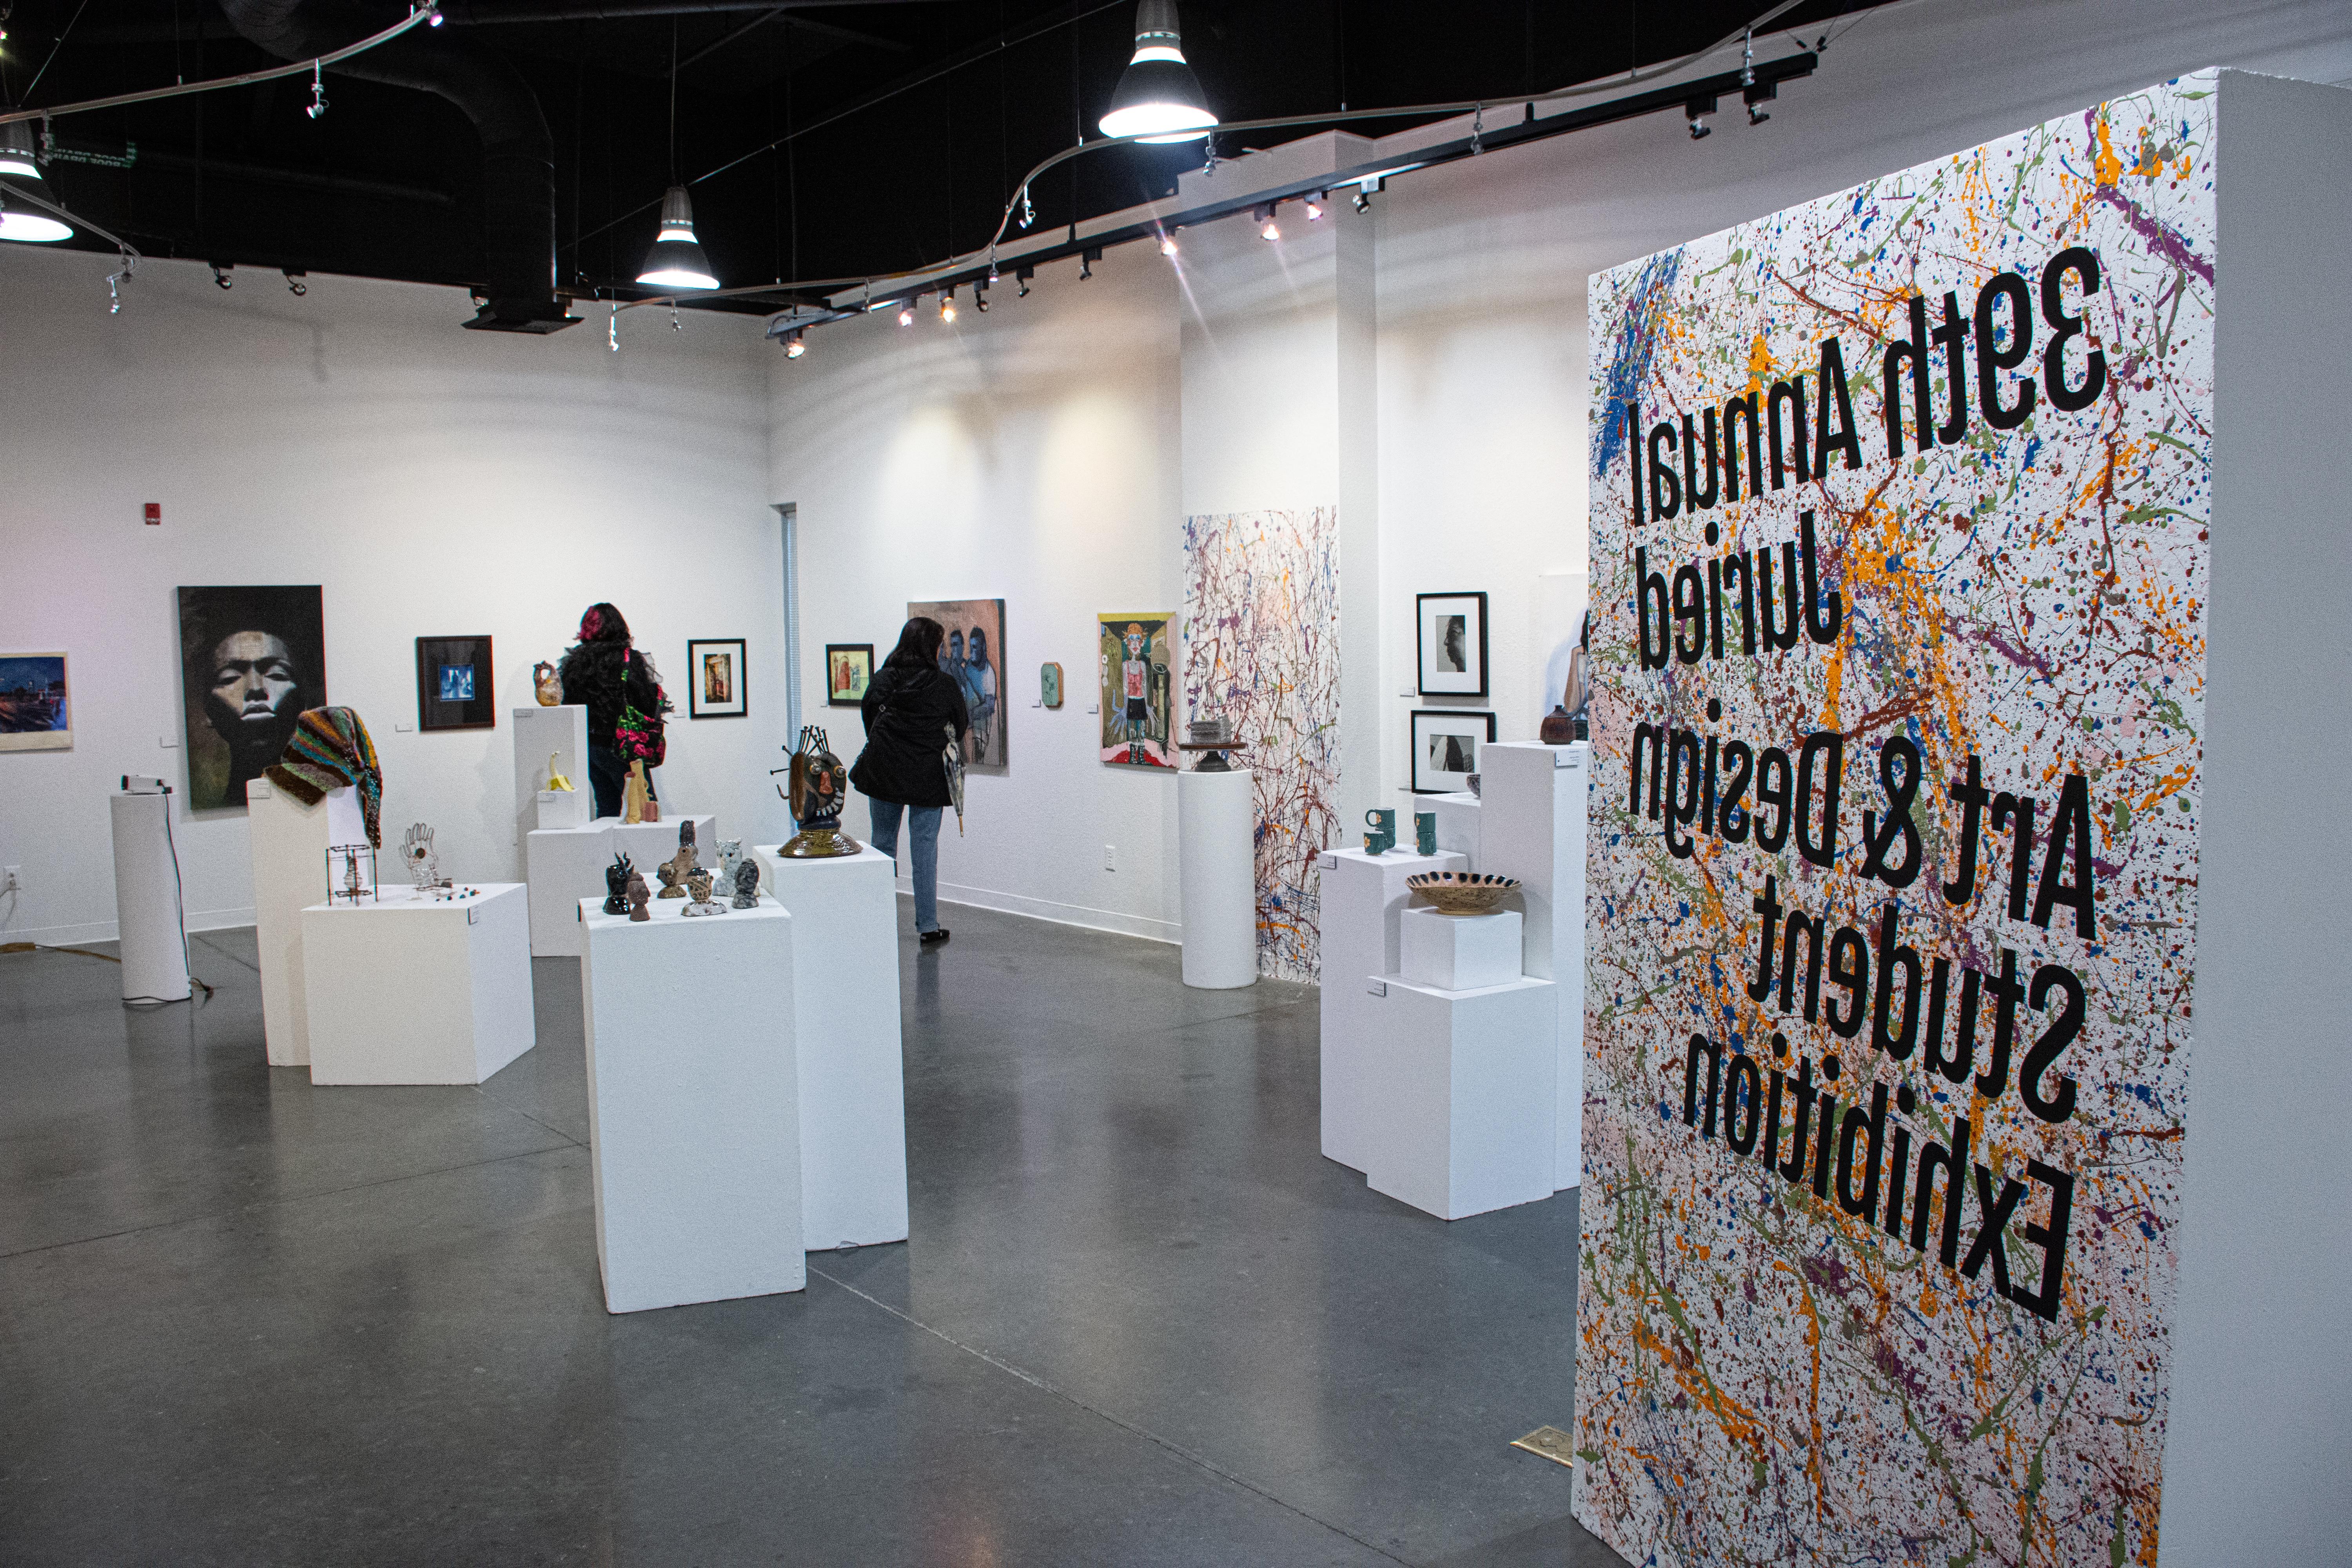 Wide shot of the galery space with art 